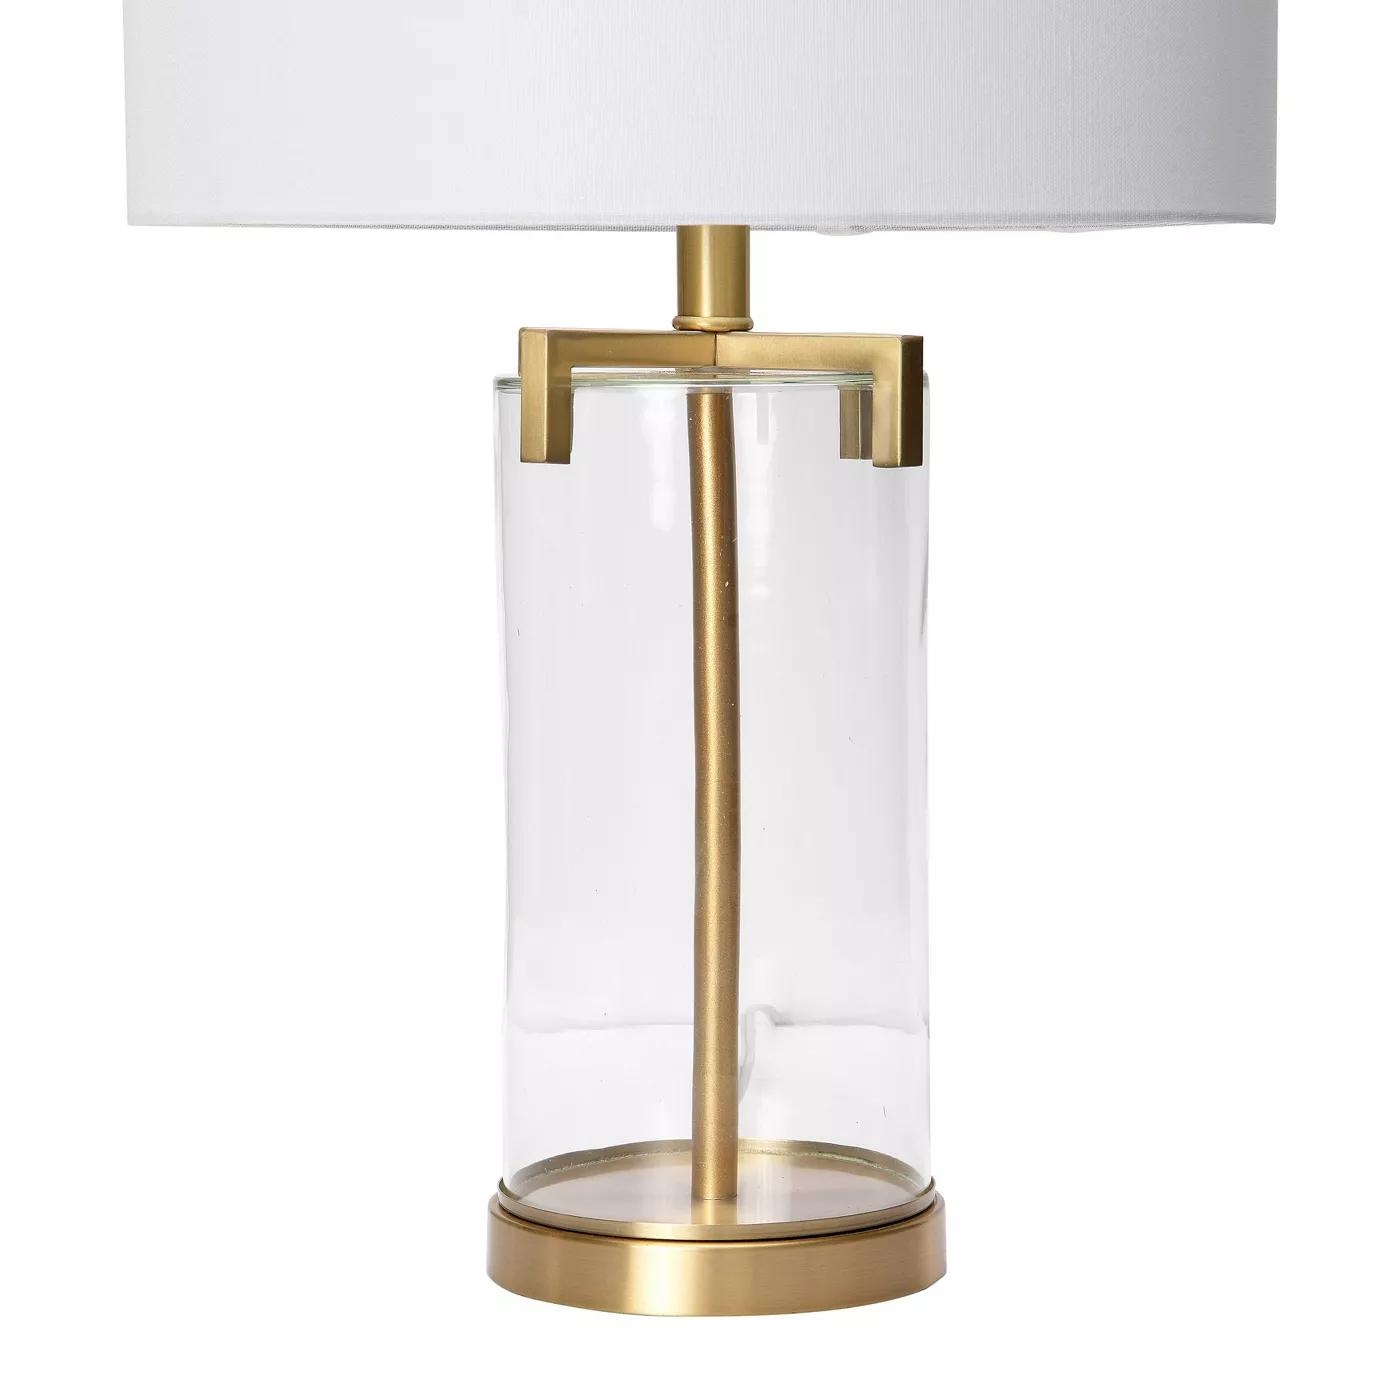 26.5" Brushed Gold and Glass Table Lamp - Image 2